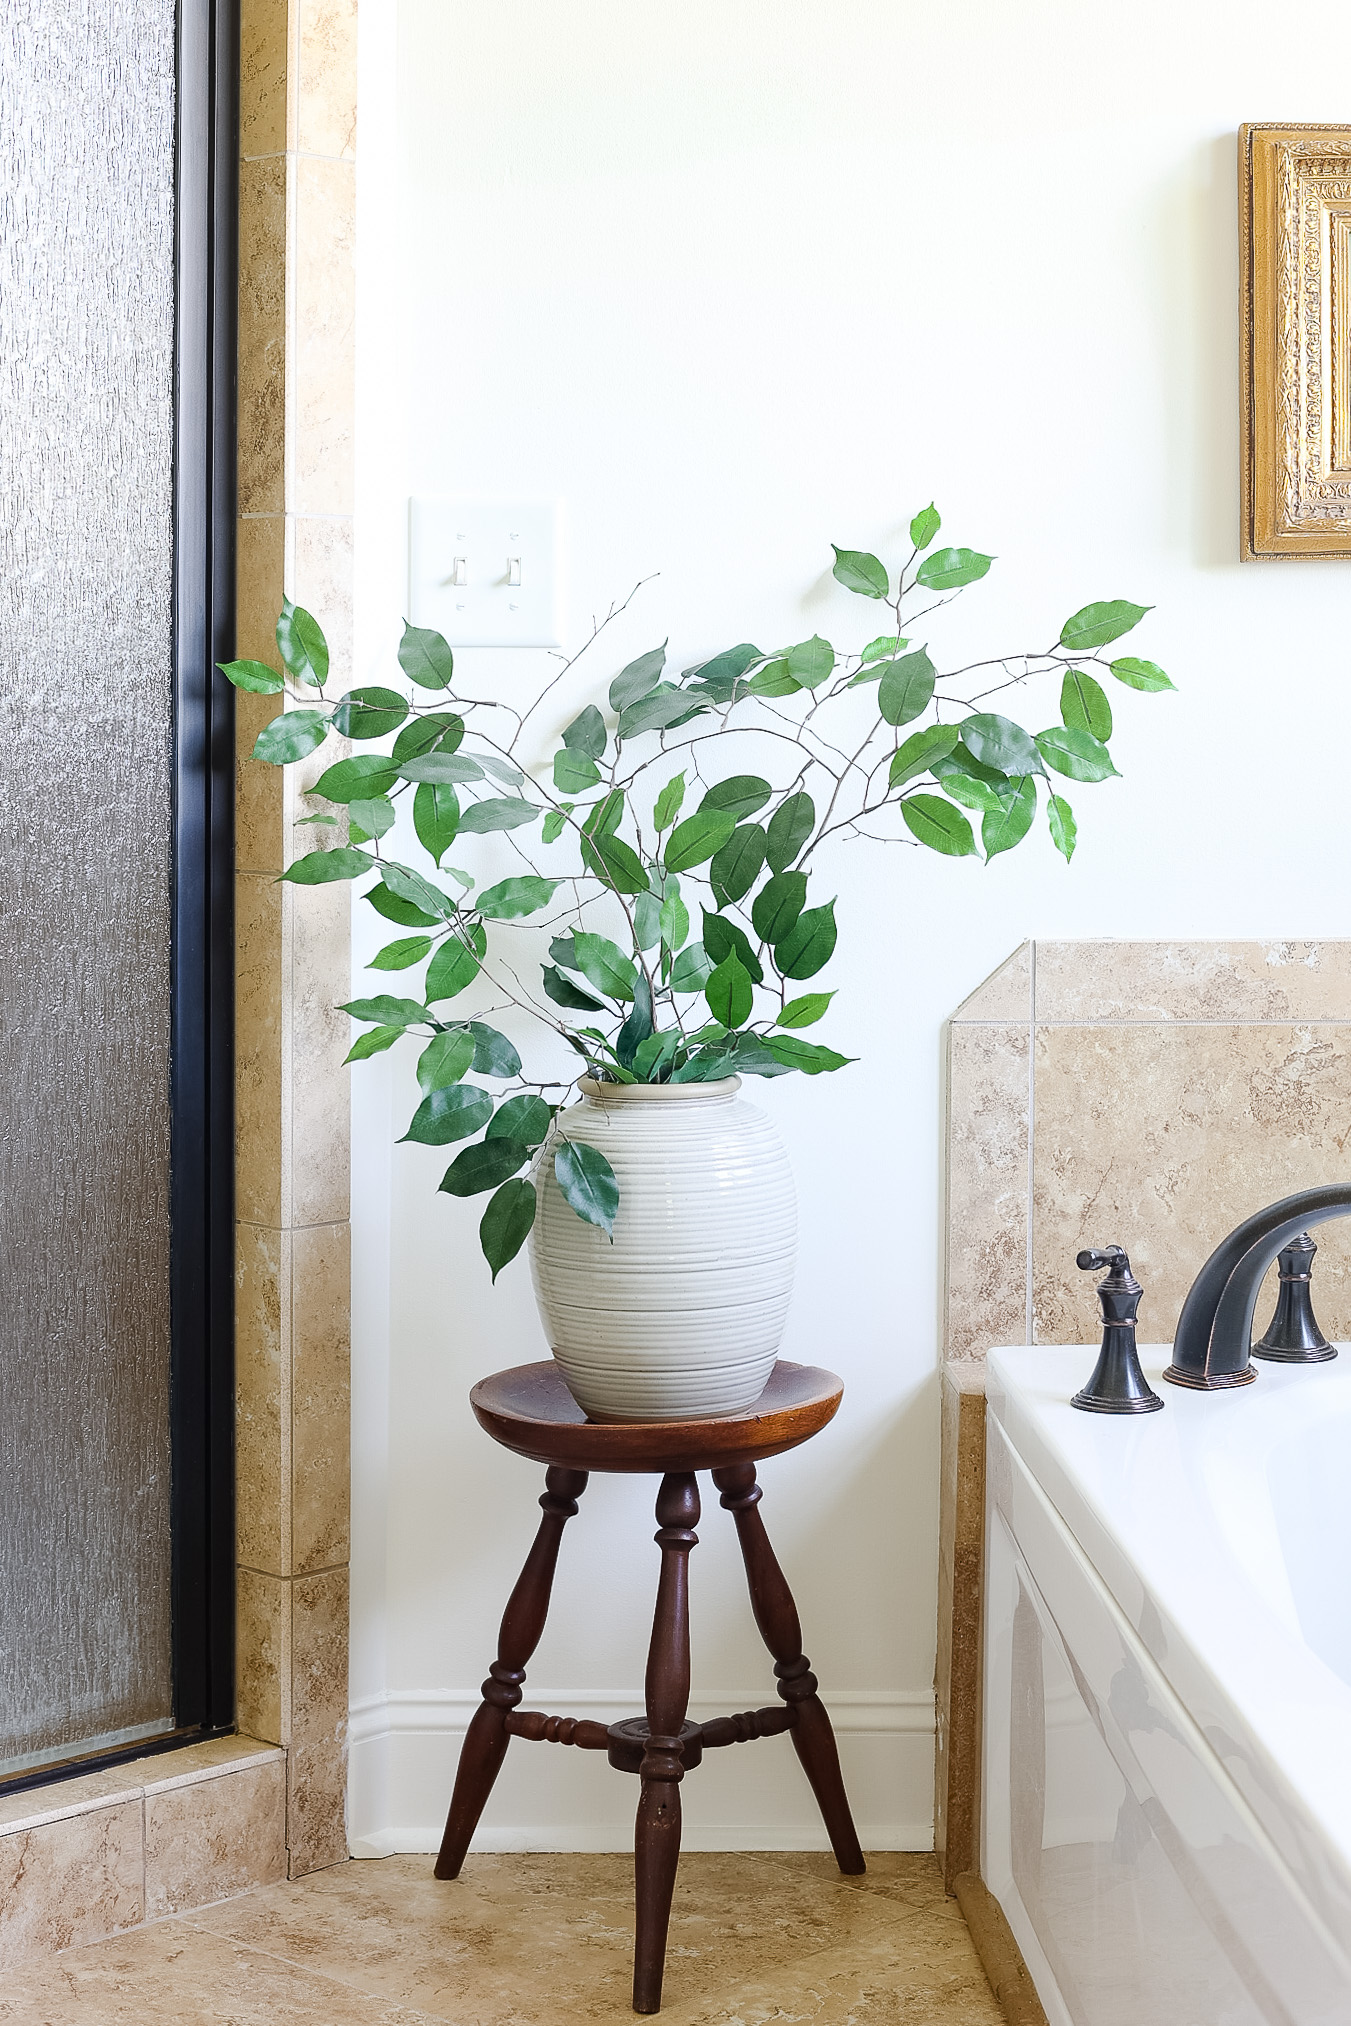 bathtub with towel and artwork with vase of greenery